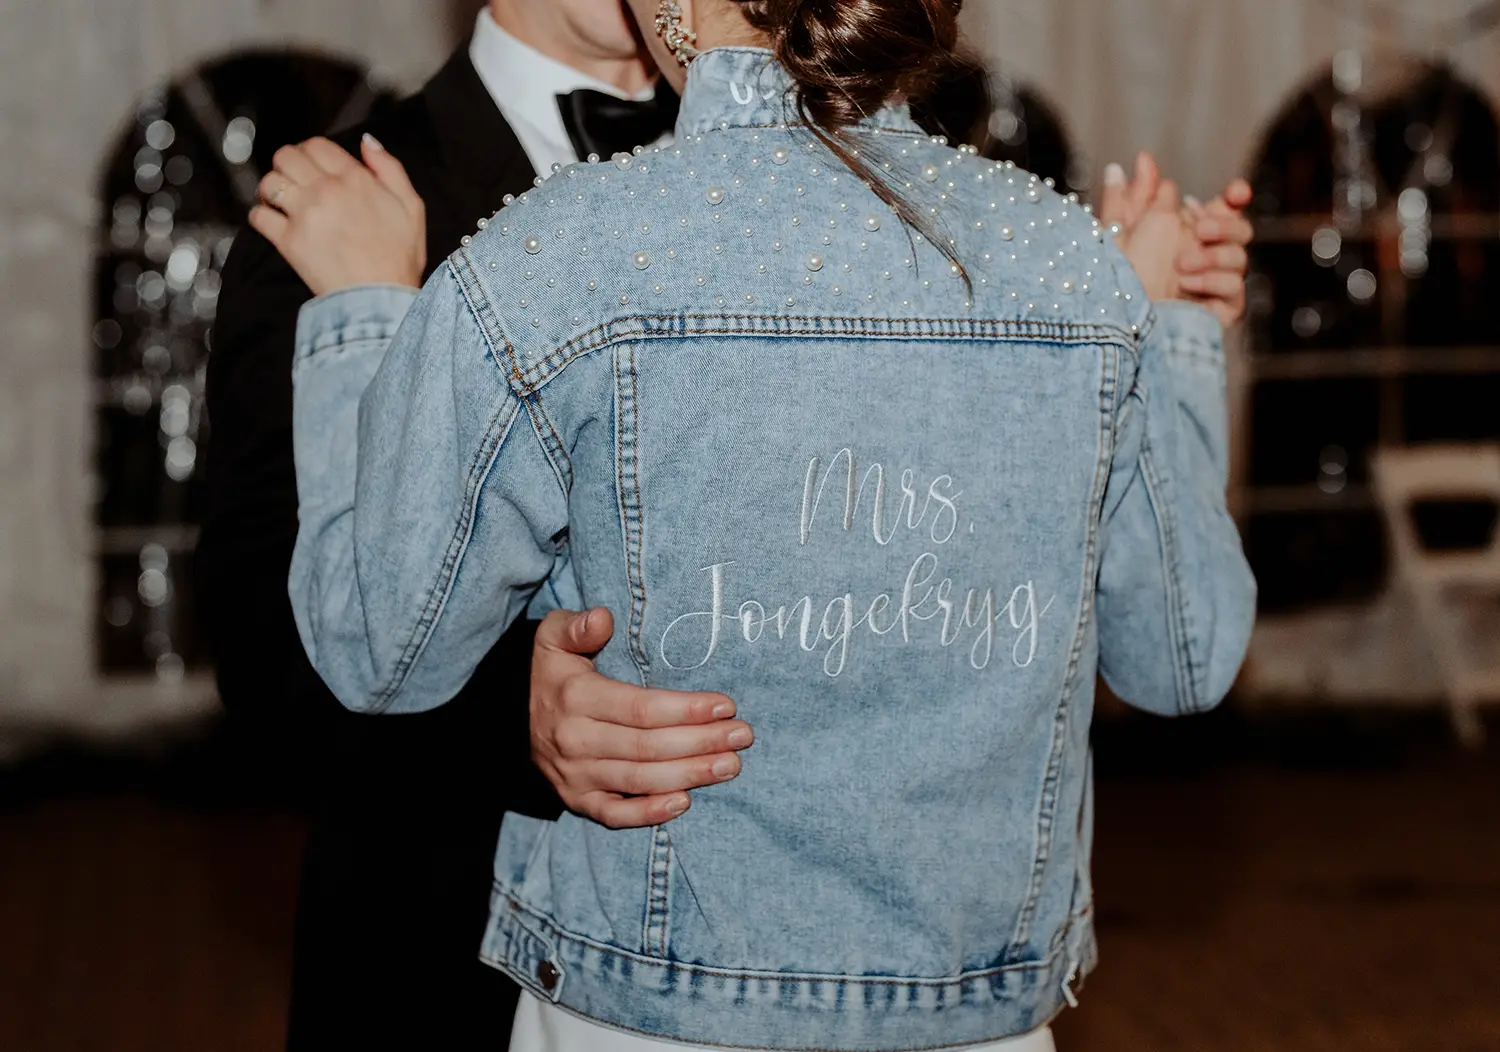 Wedding dance of couple with bride who has a Denim jack with Mrs jongekrygs embroidered 